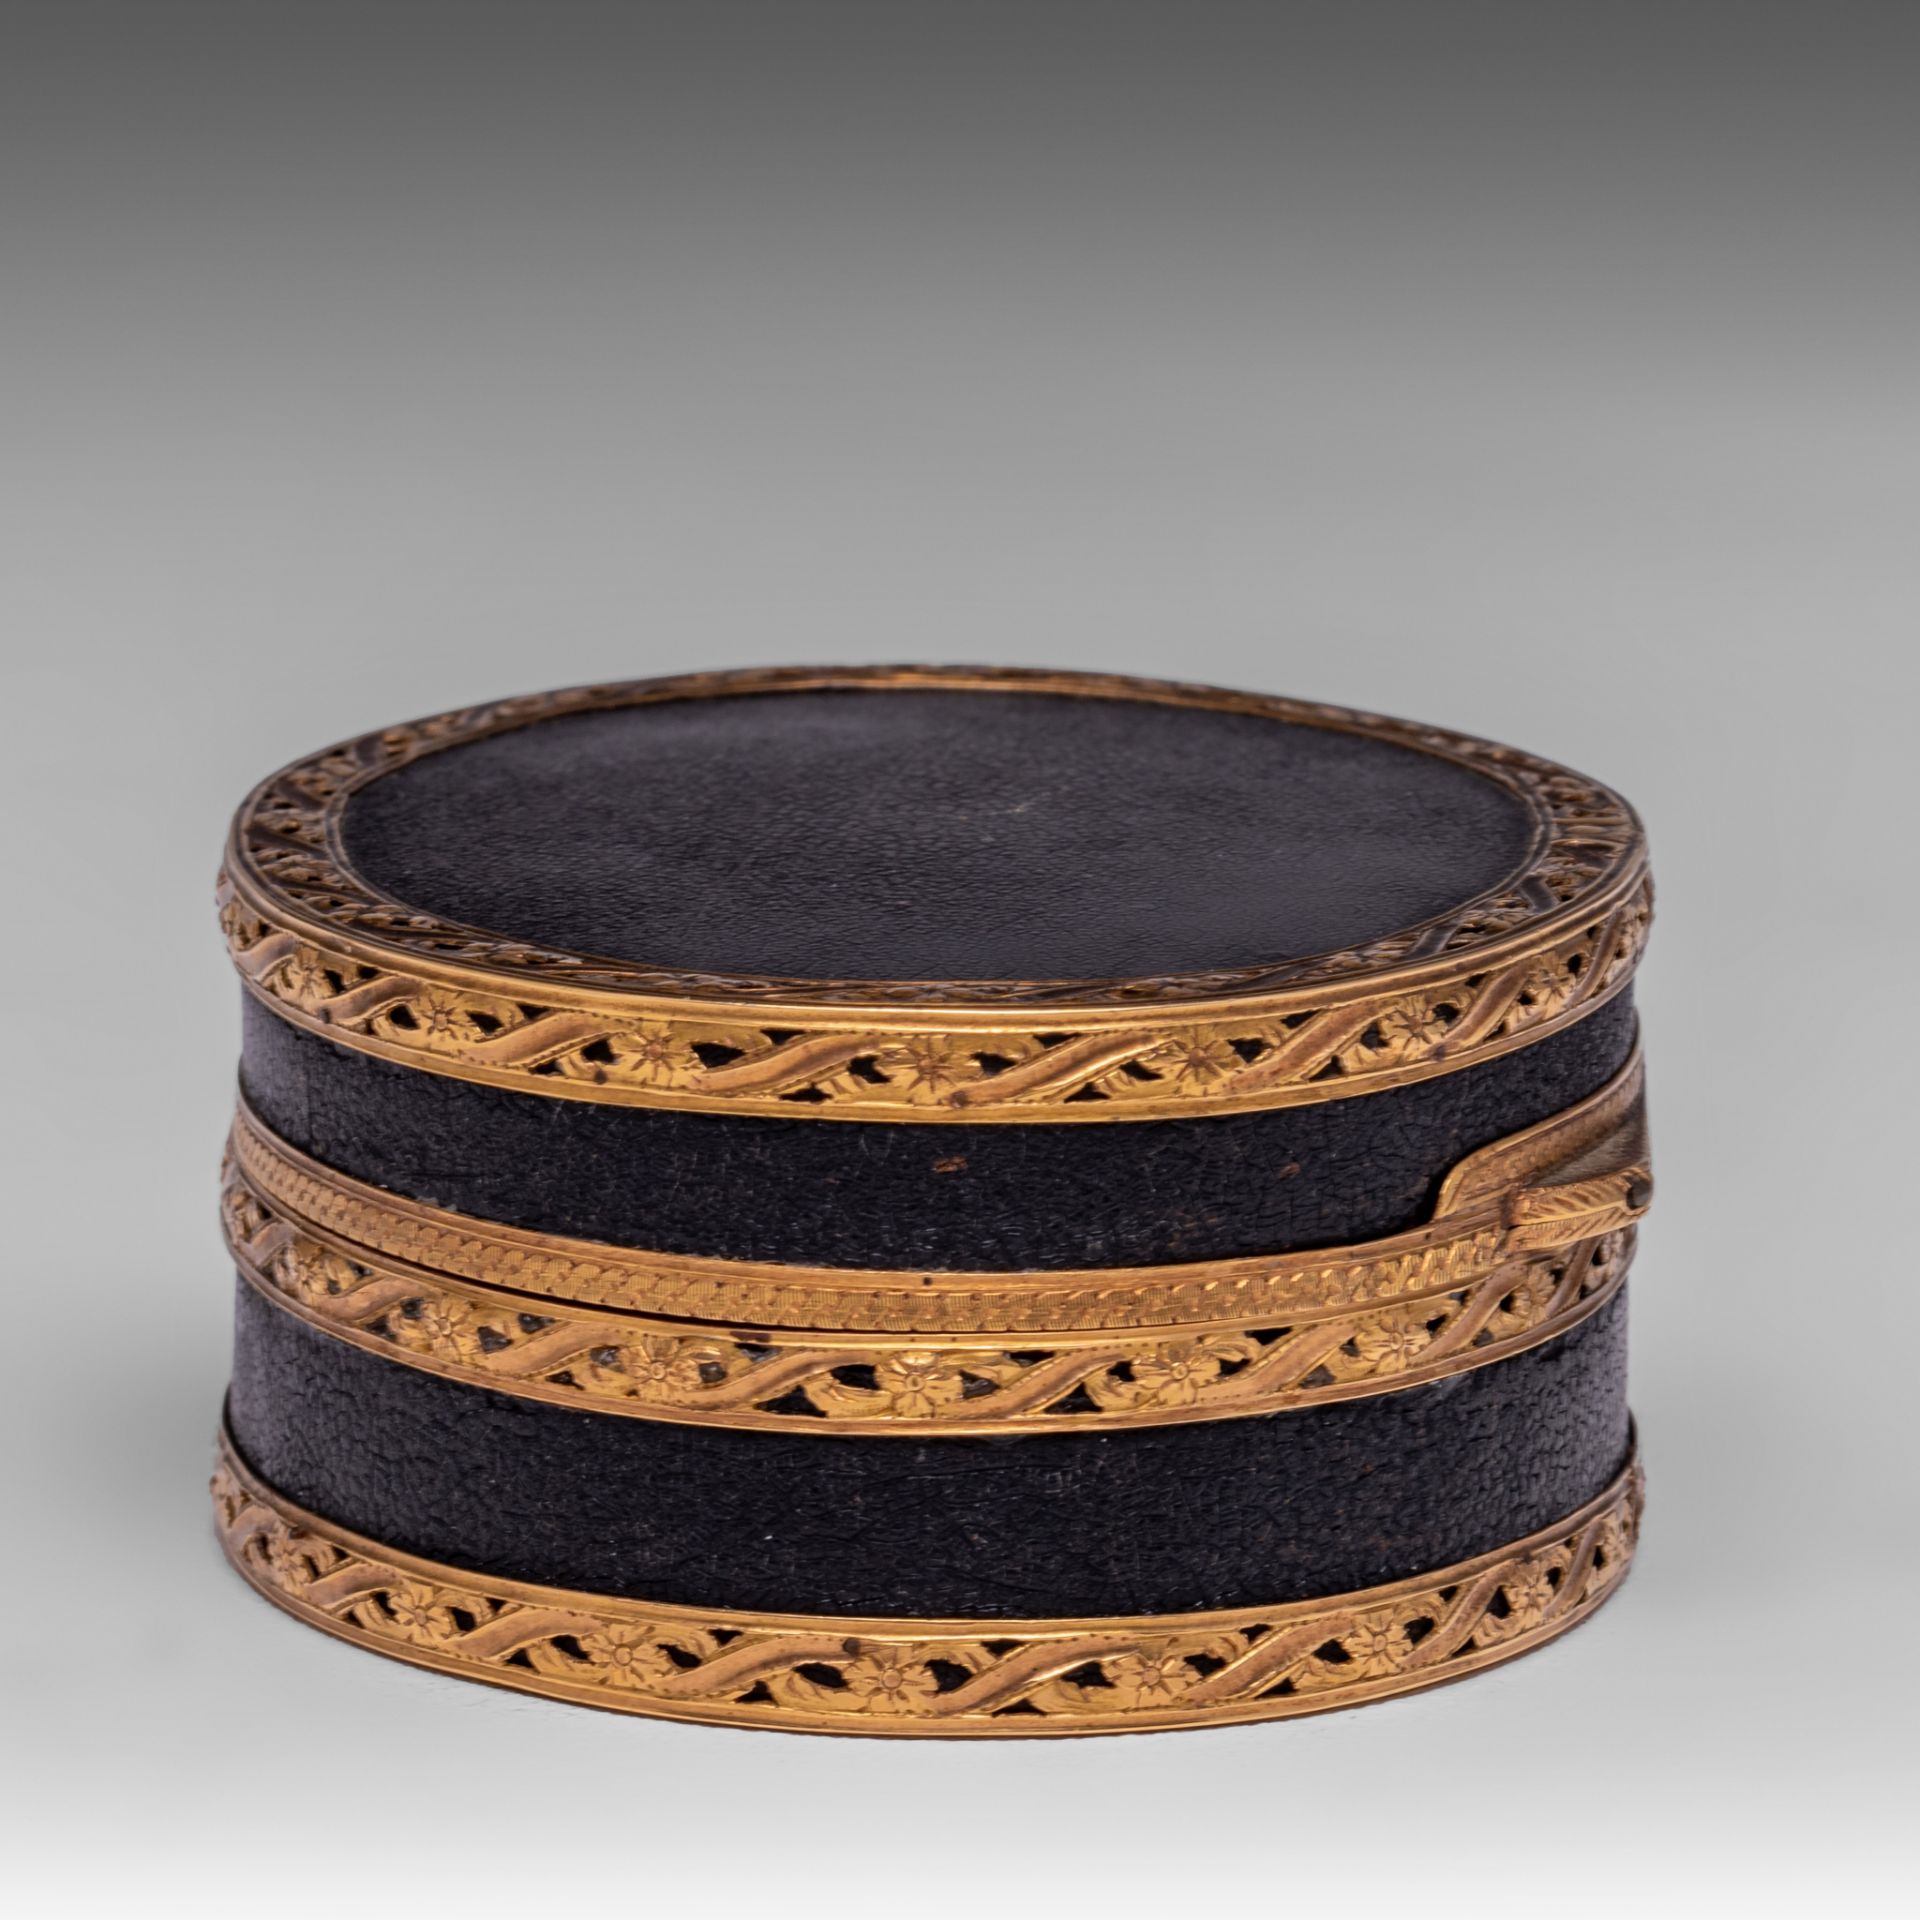 A fine Louis XVI leather and gold snuffbox, the inside with tortoiseshell, late 18thC, H 3,5 cm - Image 7 of 7